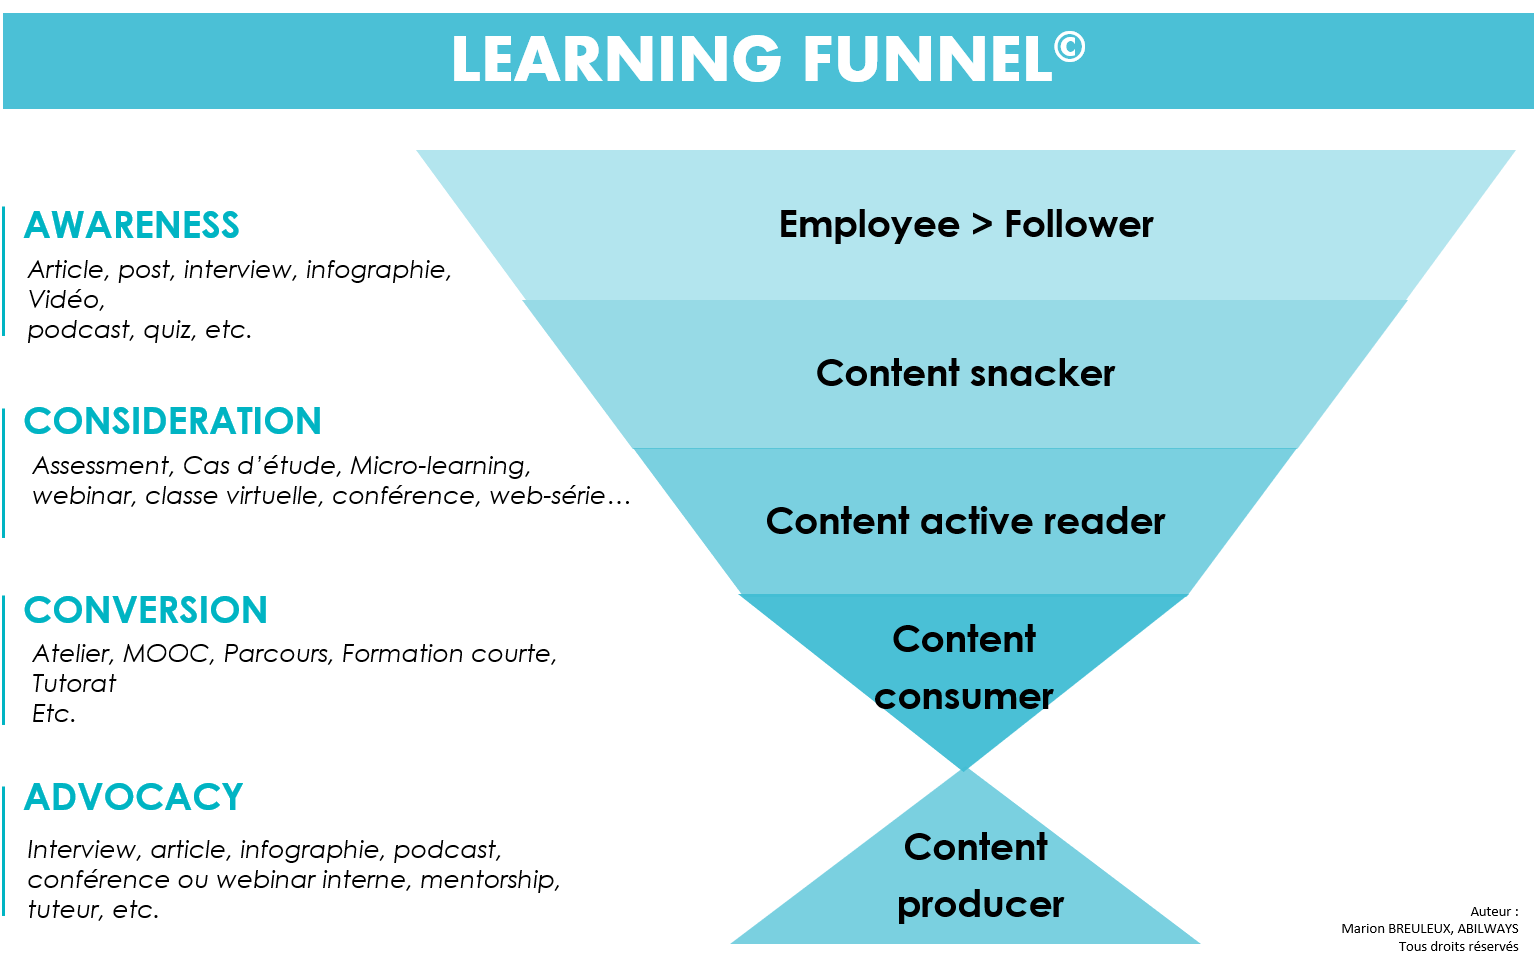 Le learning funnel